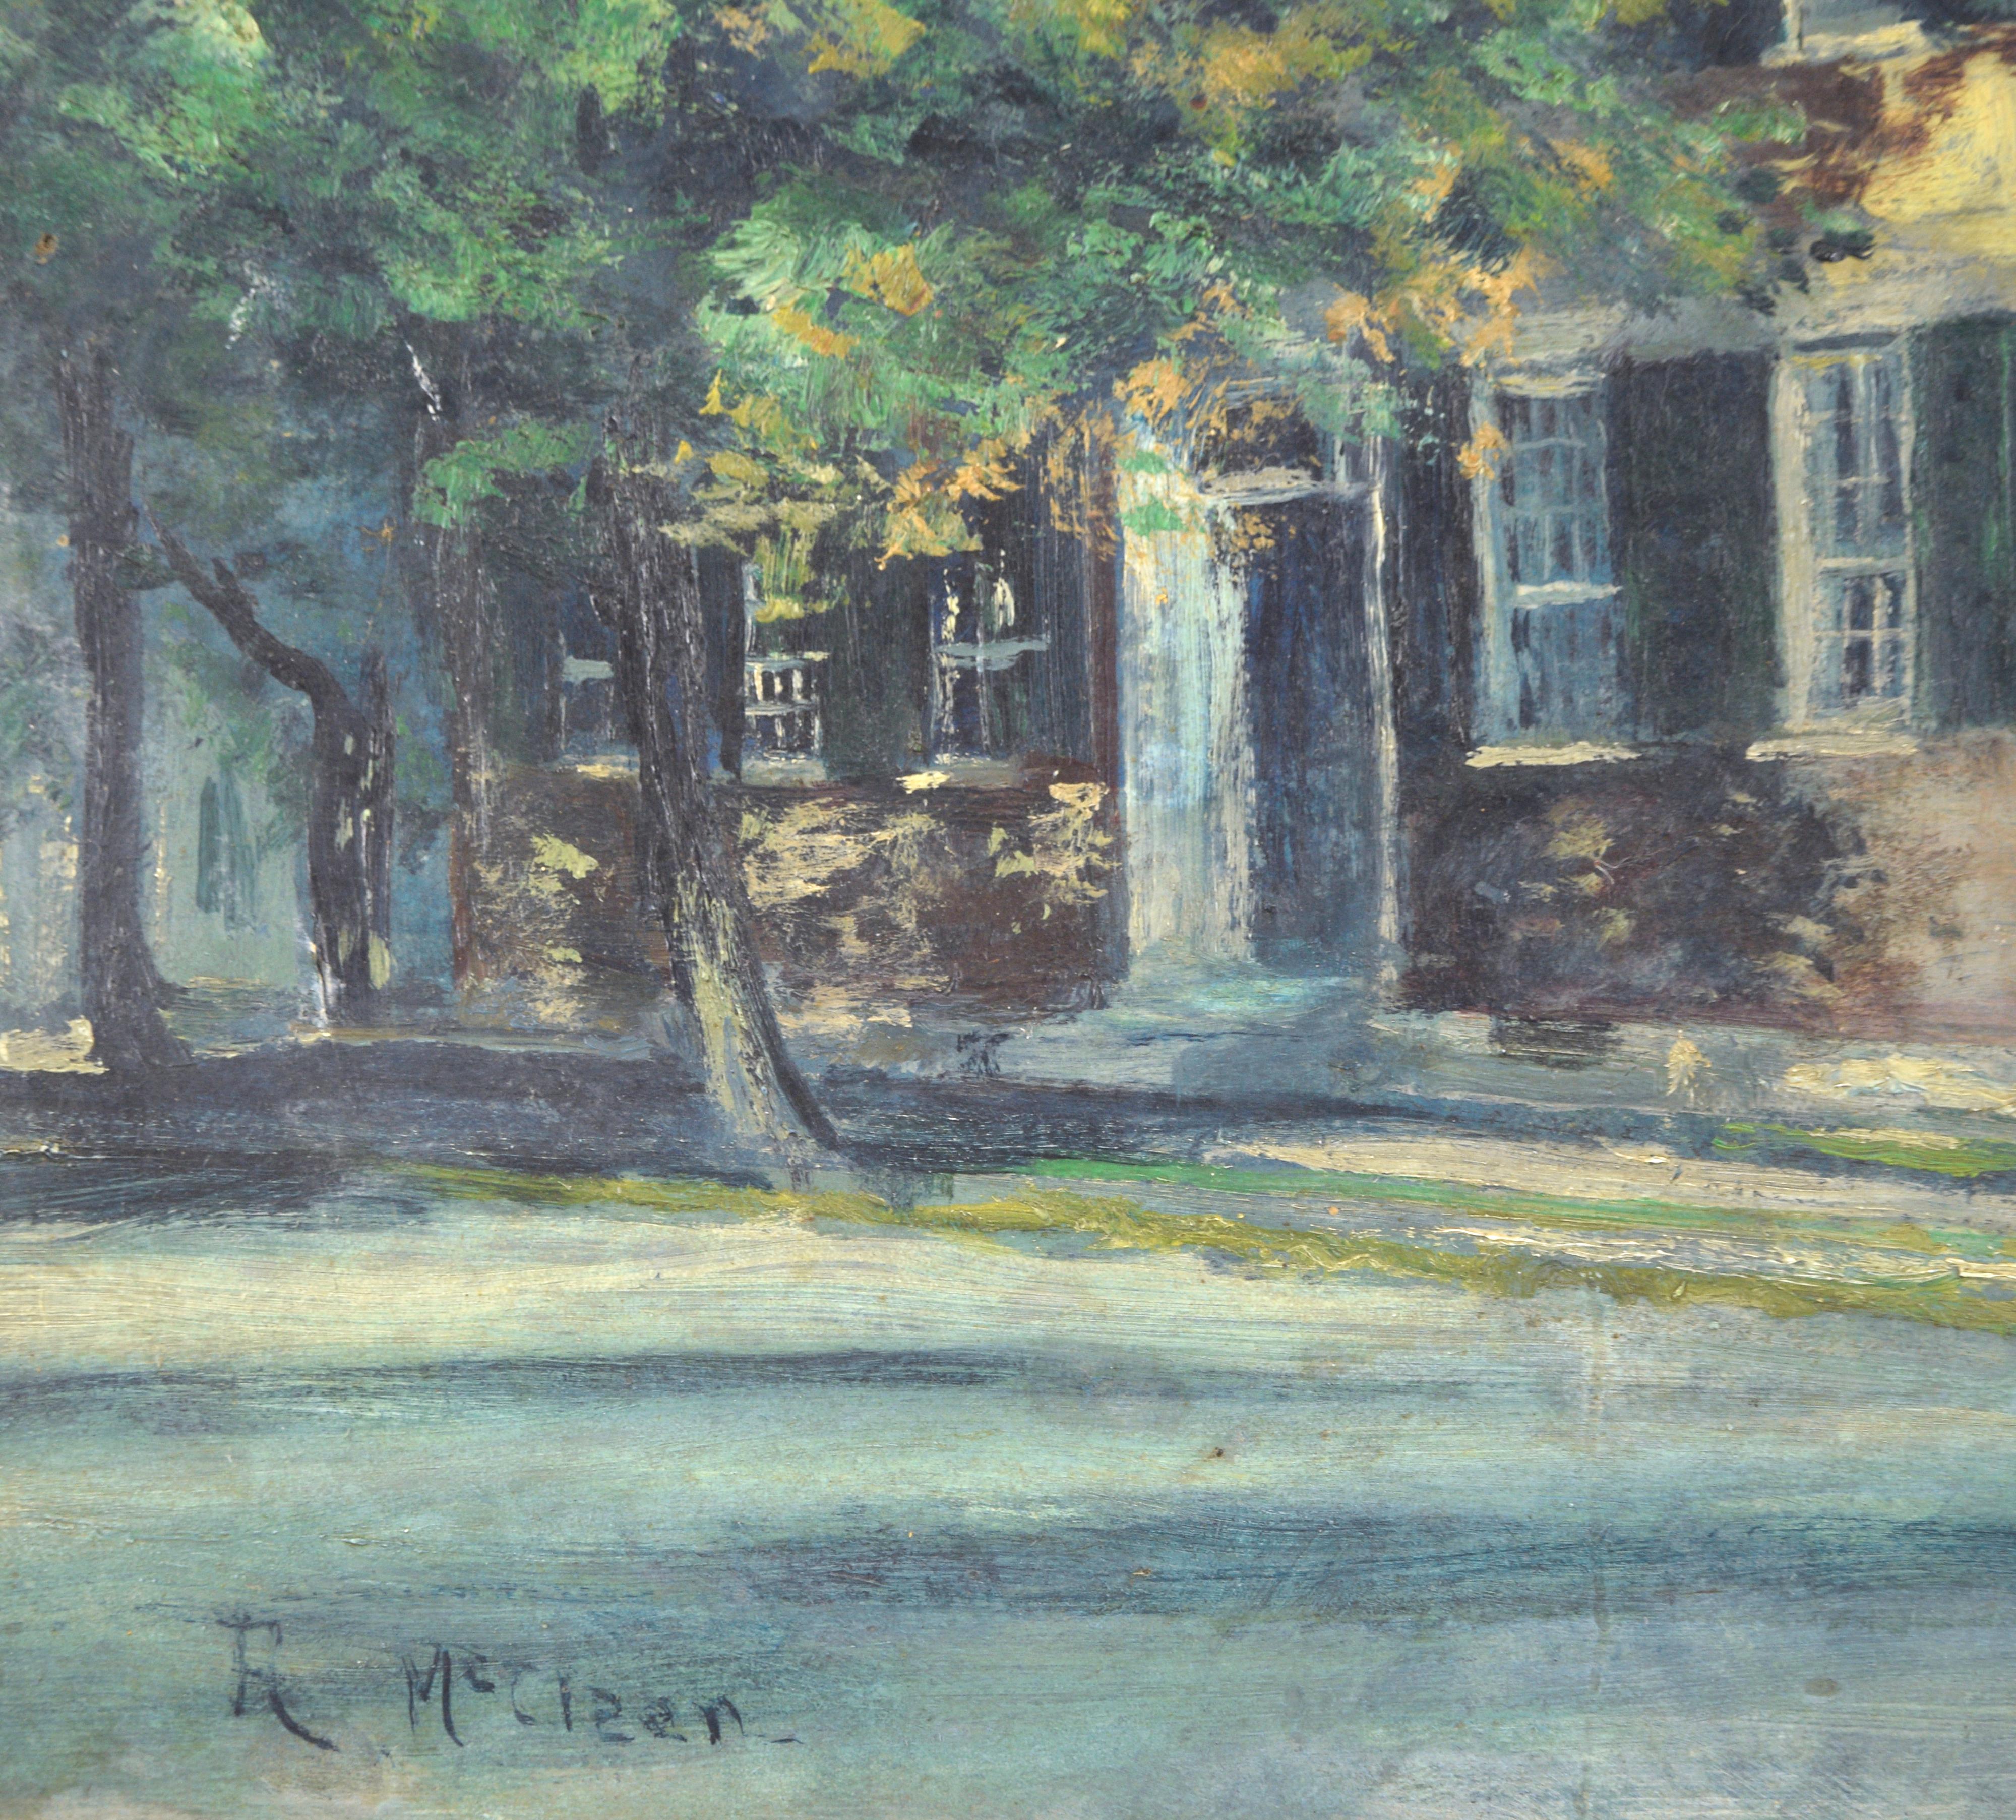 Historical Home Russellville Kentucky 1930 - American Impressionist Painting by Roberta Fisk McClean